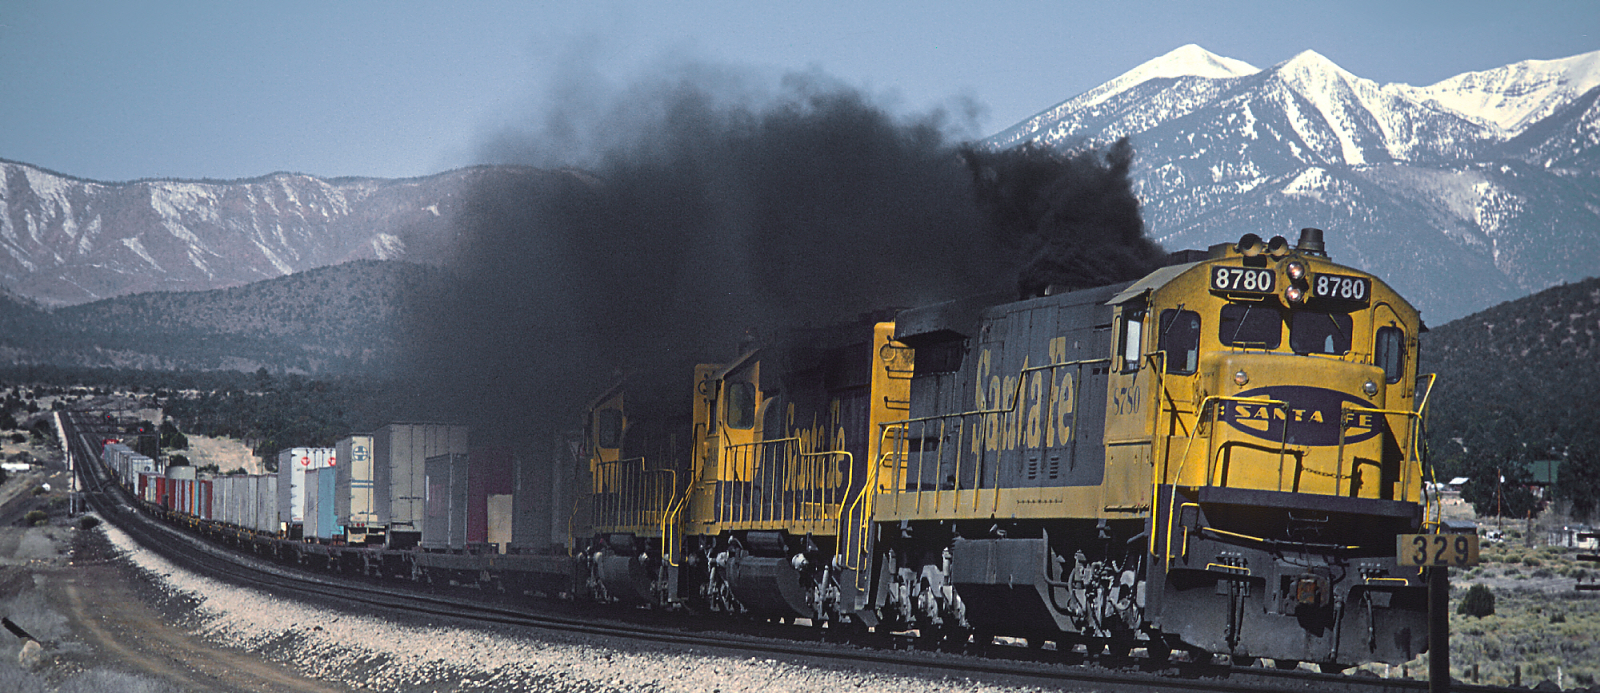 A freight train in Darling, Arizona is led by a heavily sooting U36C